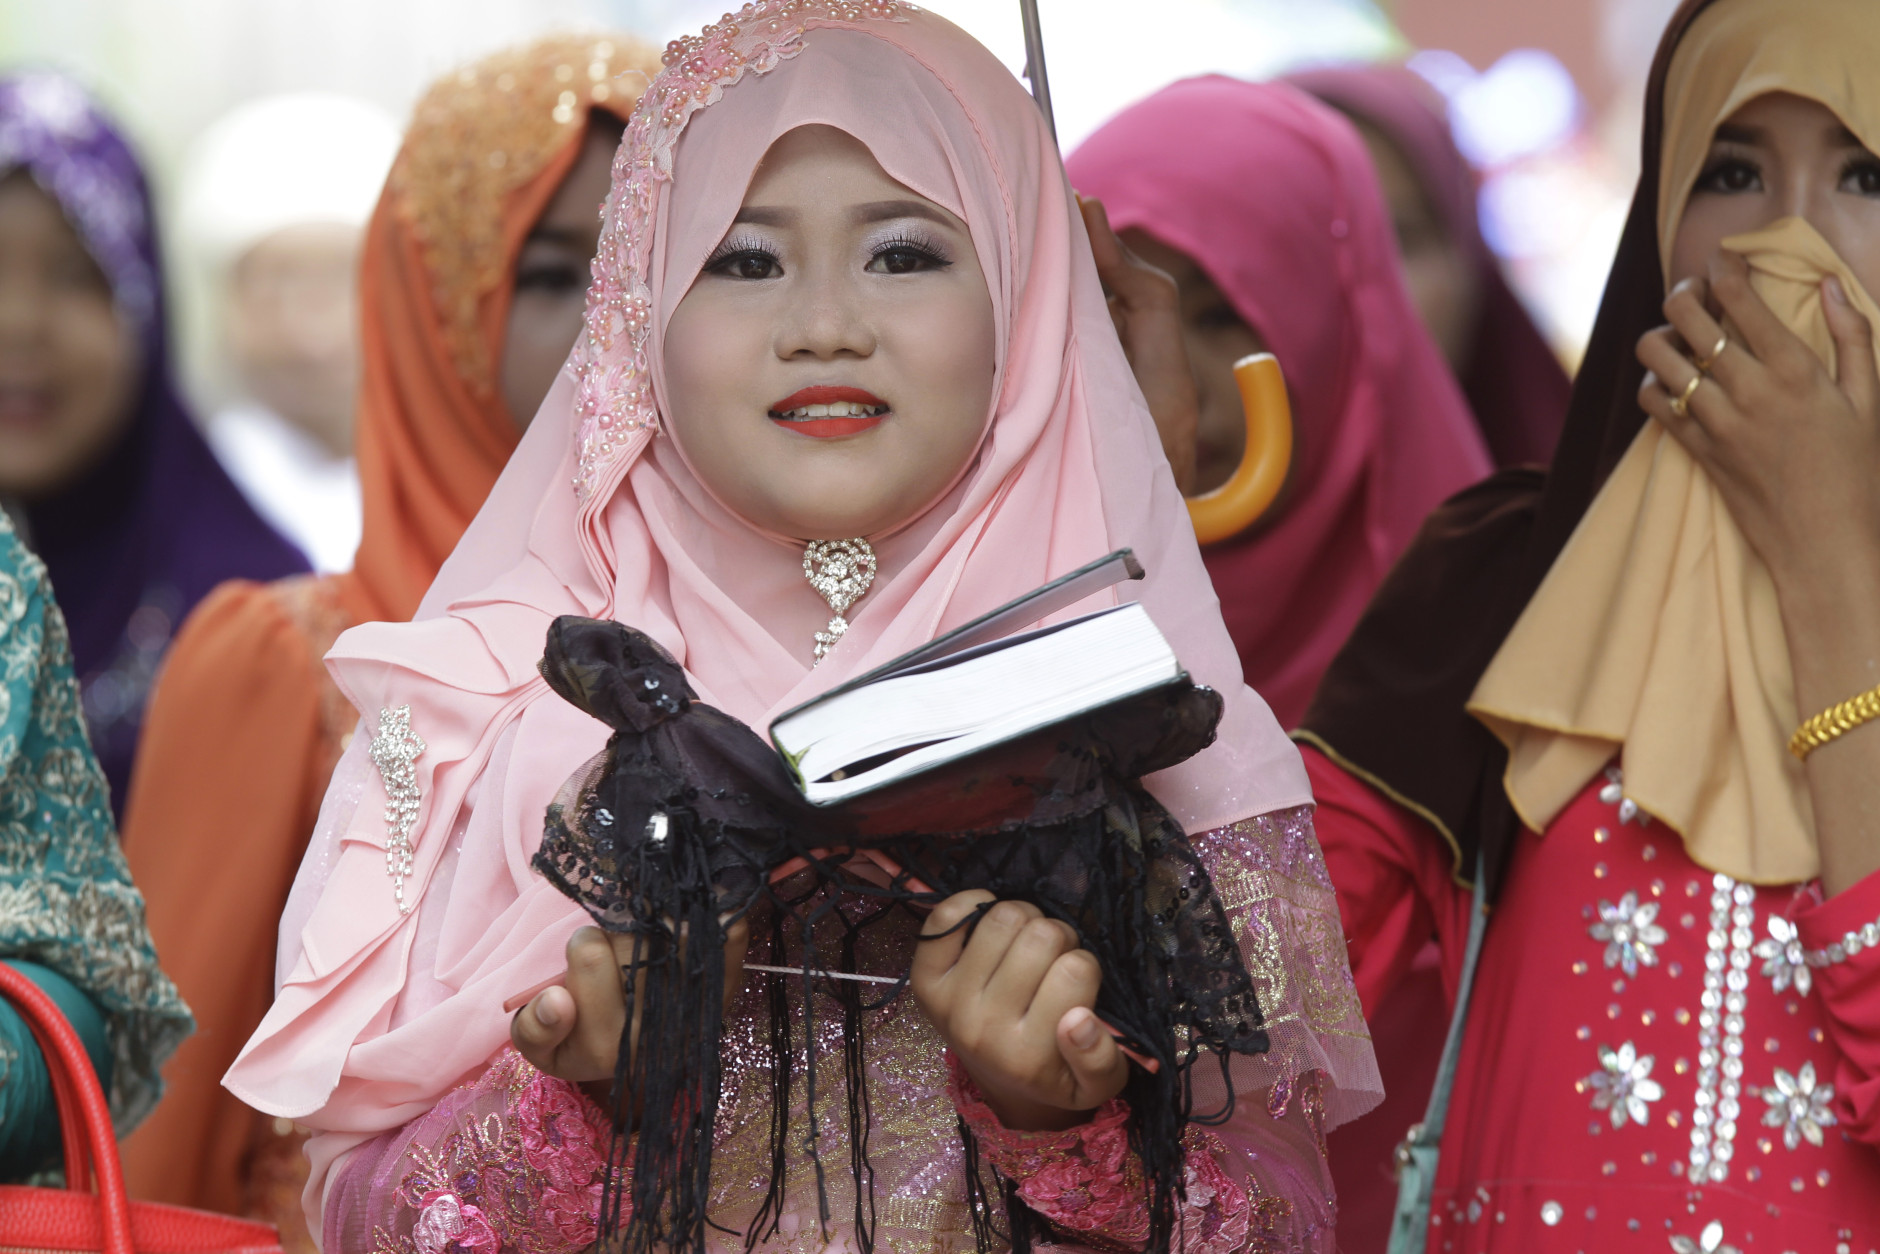 A girl carries a Quran during Eid al-Fitr prayers along the Mekong river of Tanong, northeast of Phnom Penh, Cambodia, Wednesday, July 6, 2016.  The Eid al-Fitr celebrations mark the end of the Muslim holy fasting month of Ramadan. (AP Photo/Heng Sinith)